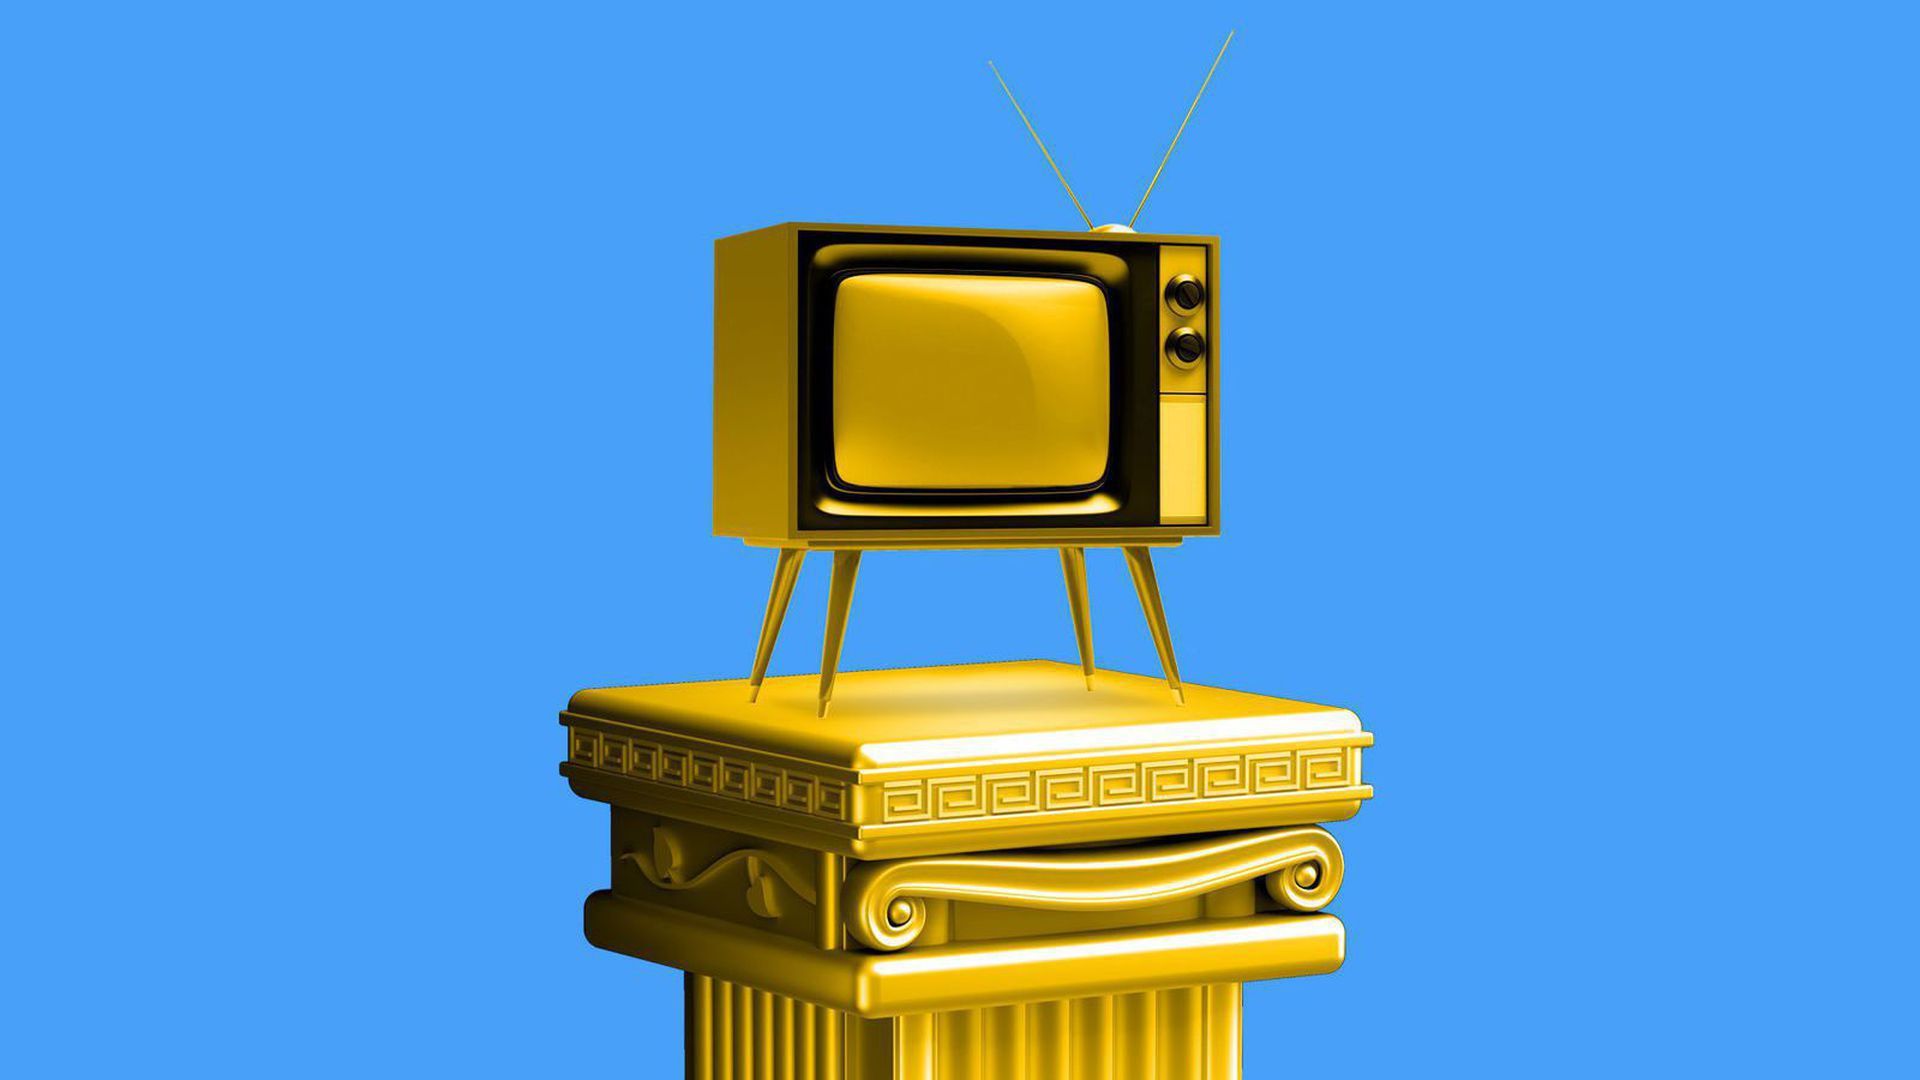 A TV on a gold stand